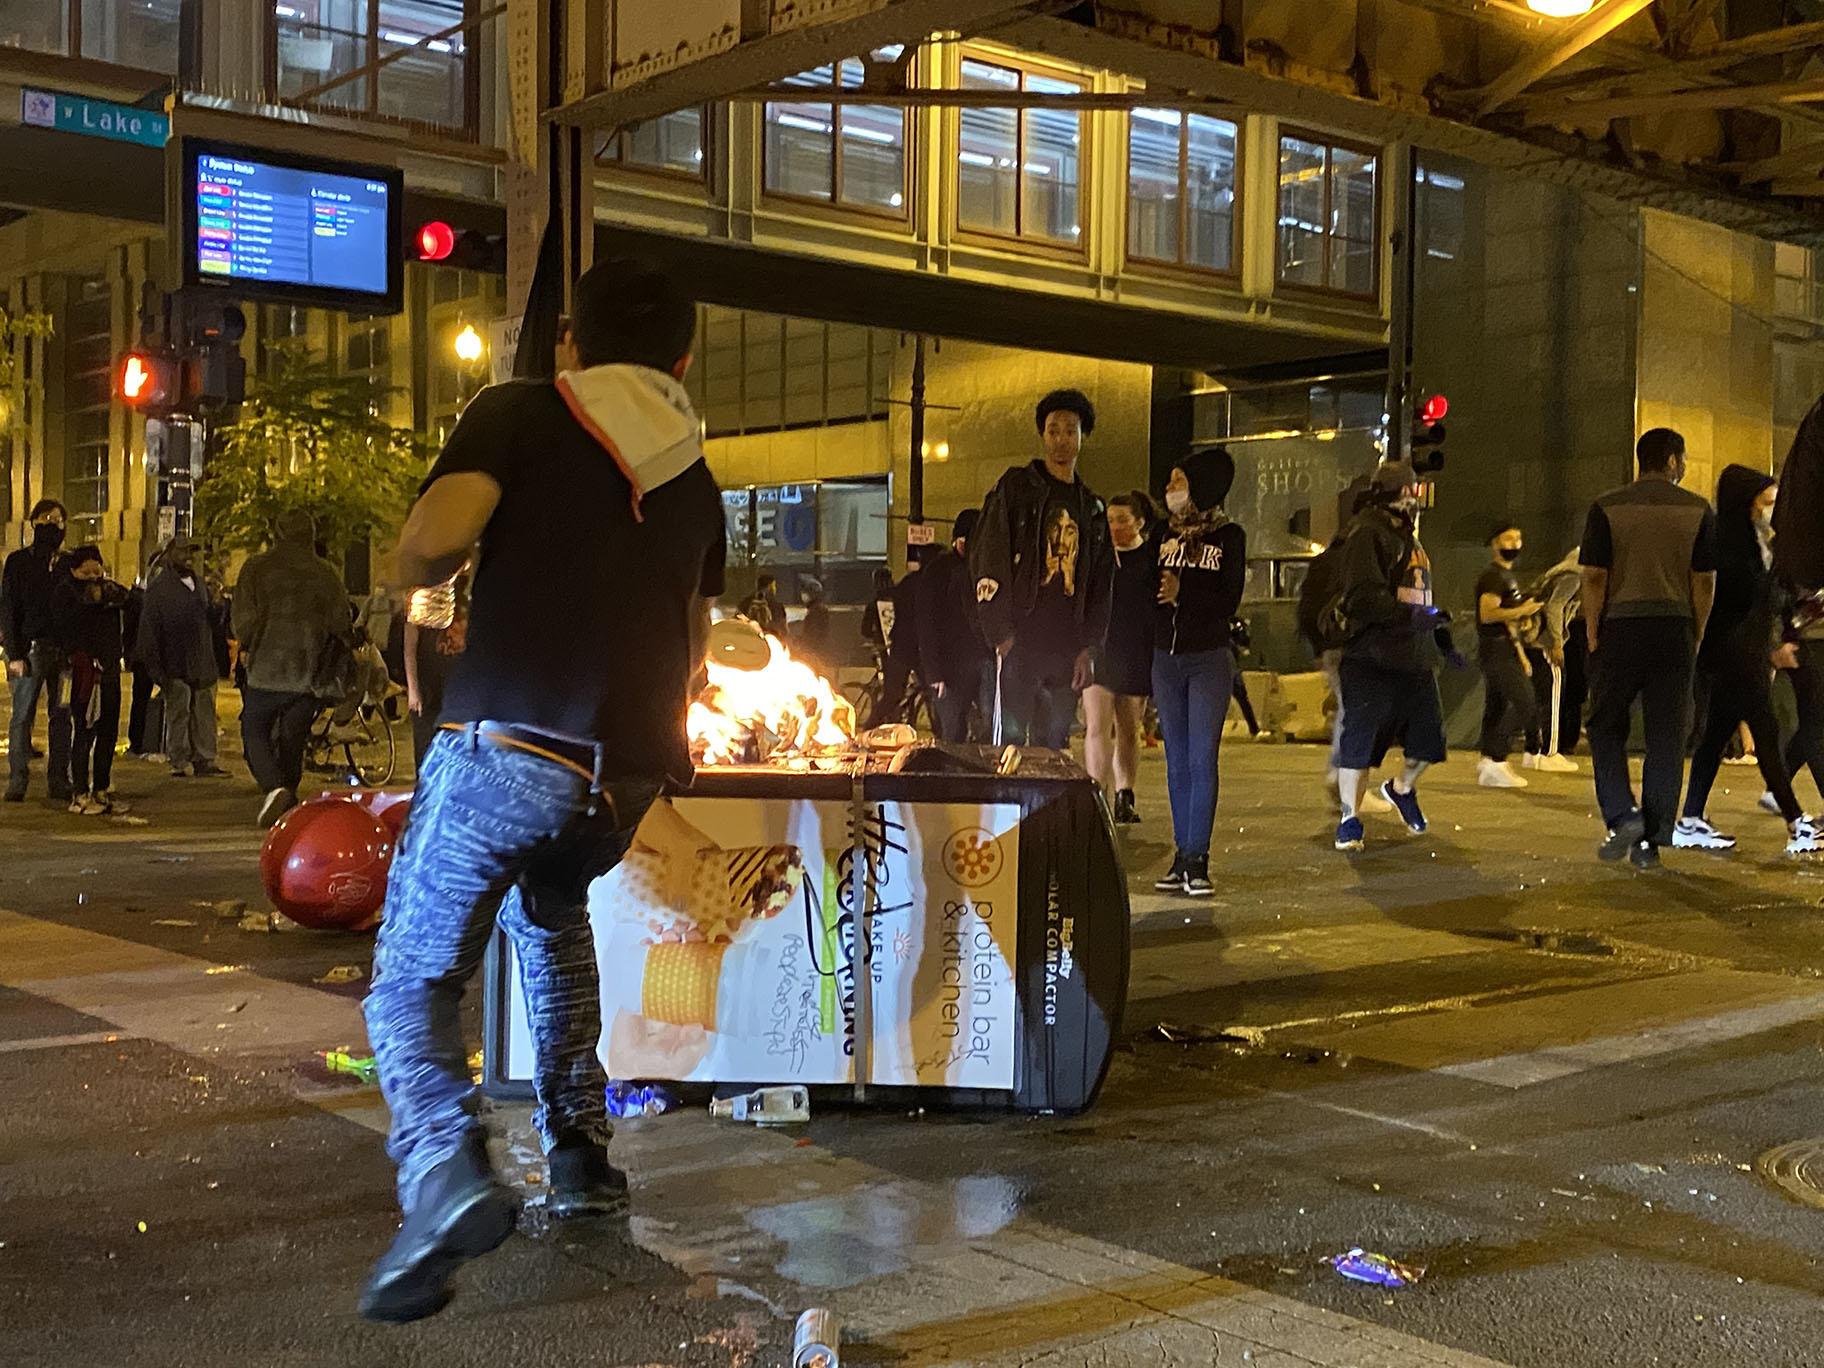 A chaotic scene in downtown Chicago on the evening of Saturday, May 30, 2020. (Hugo Balta / WTTW News)